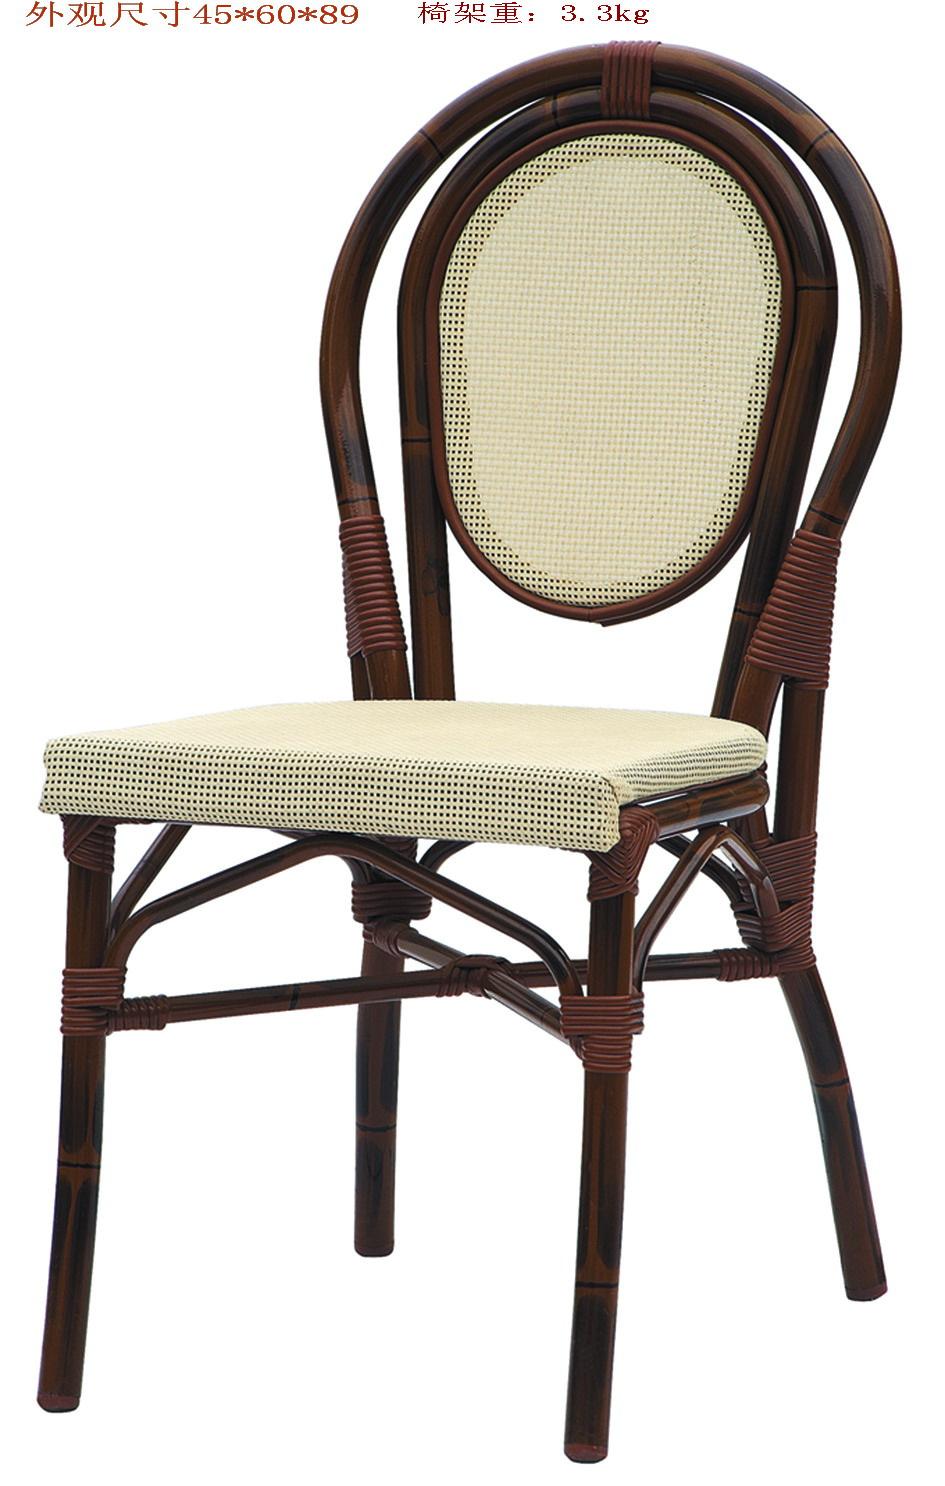 Green Bamboo Looking Dining Room Fabric Chair